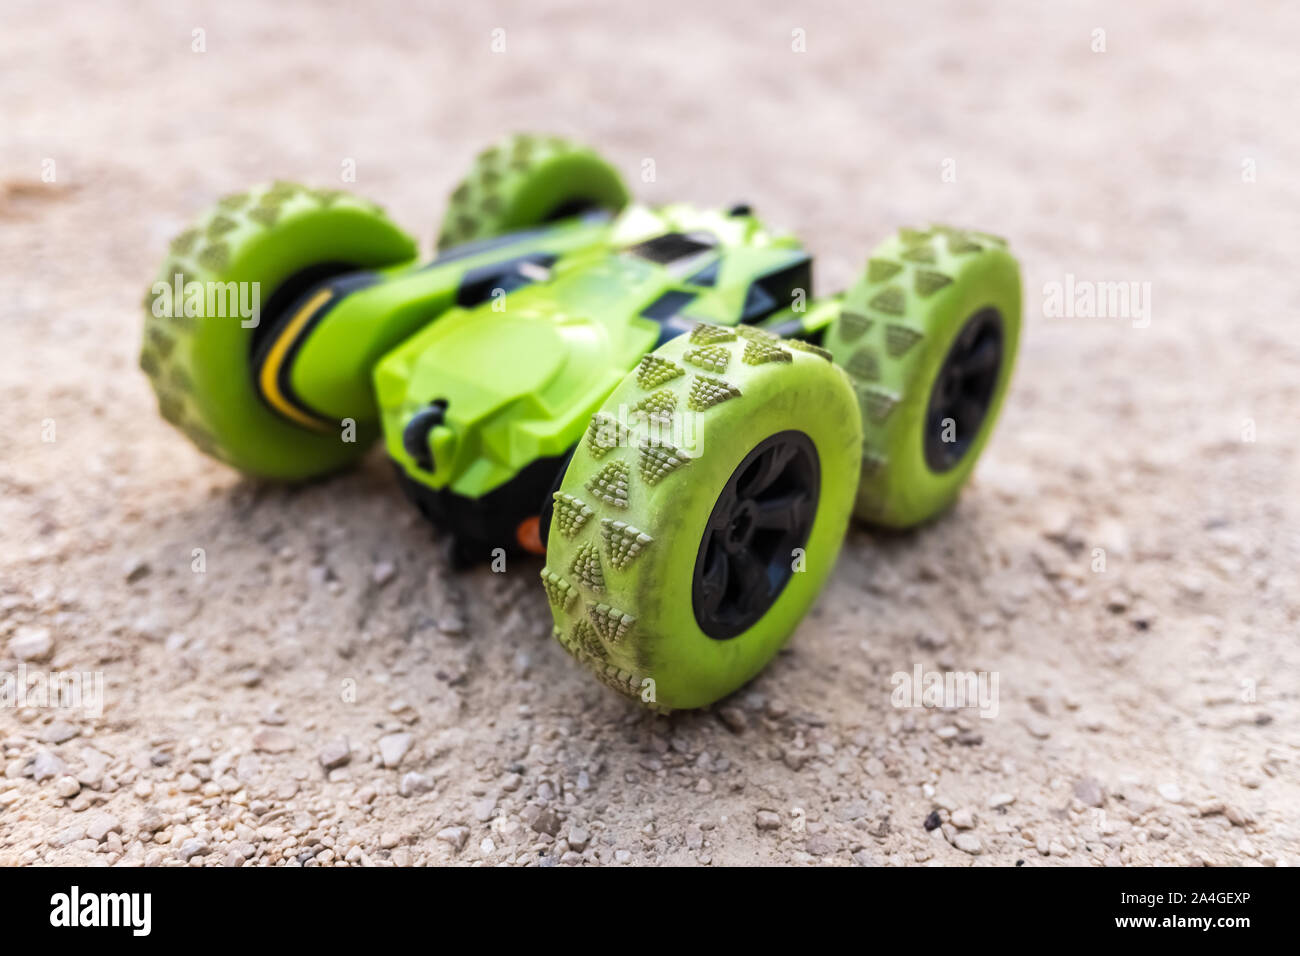 A 4x4 remote control toy car for children. Stock Photo